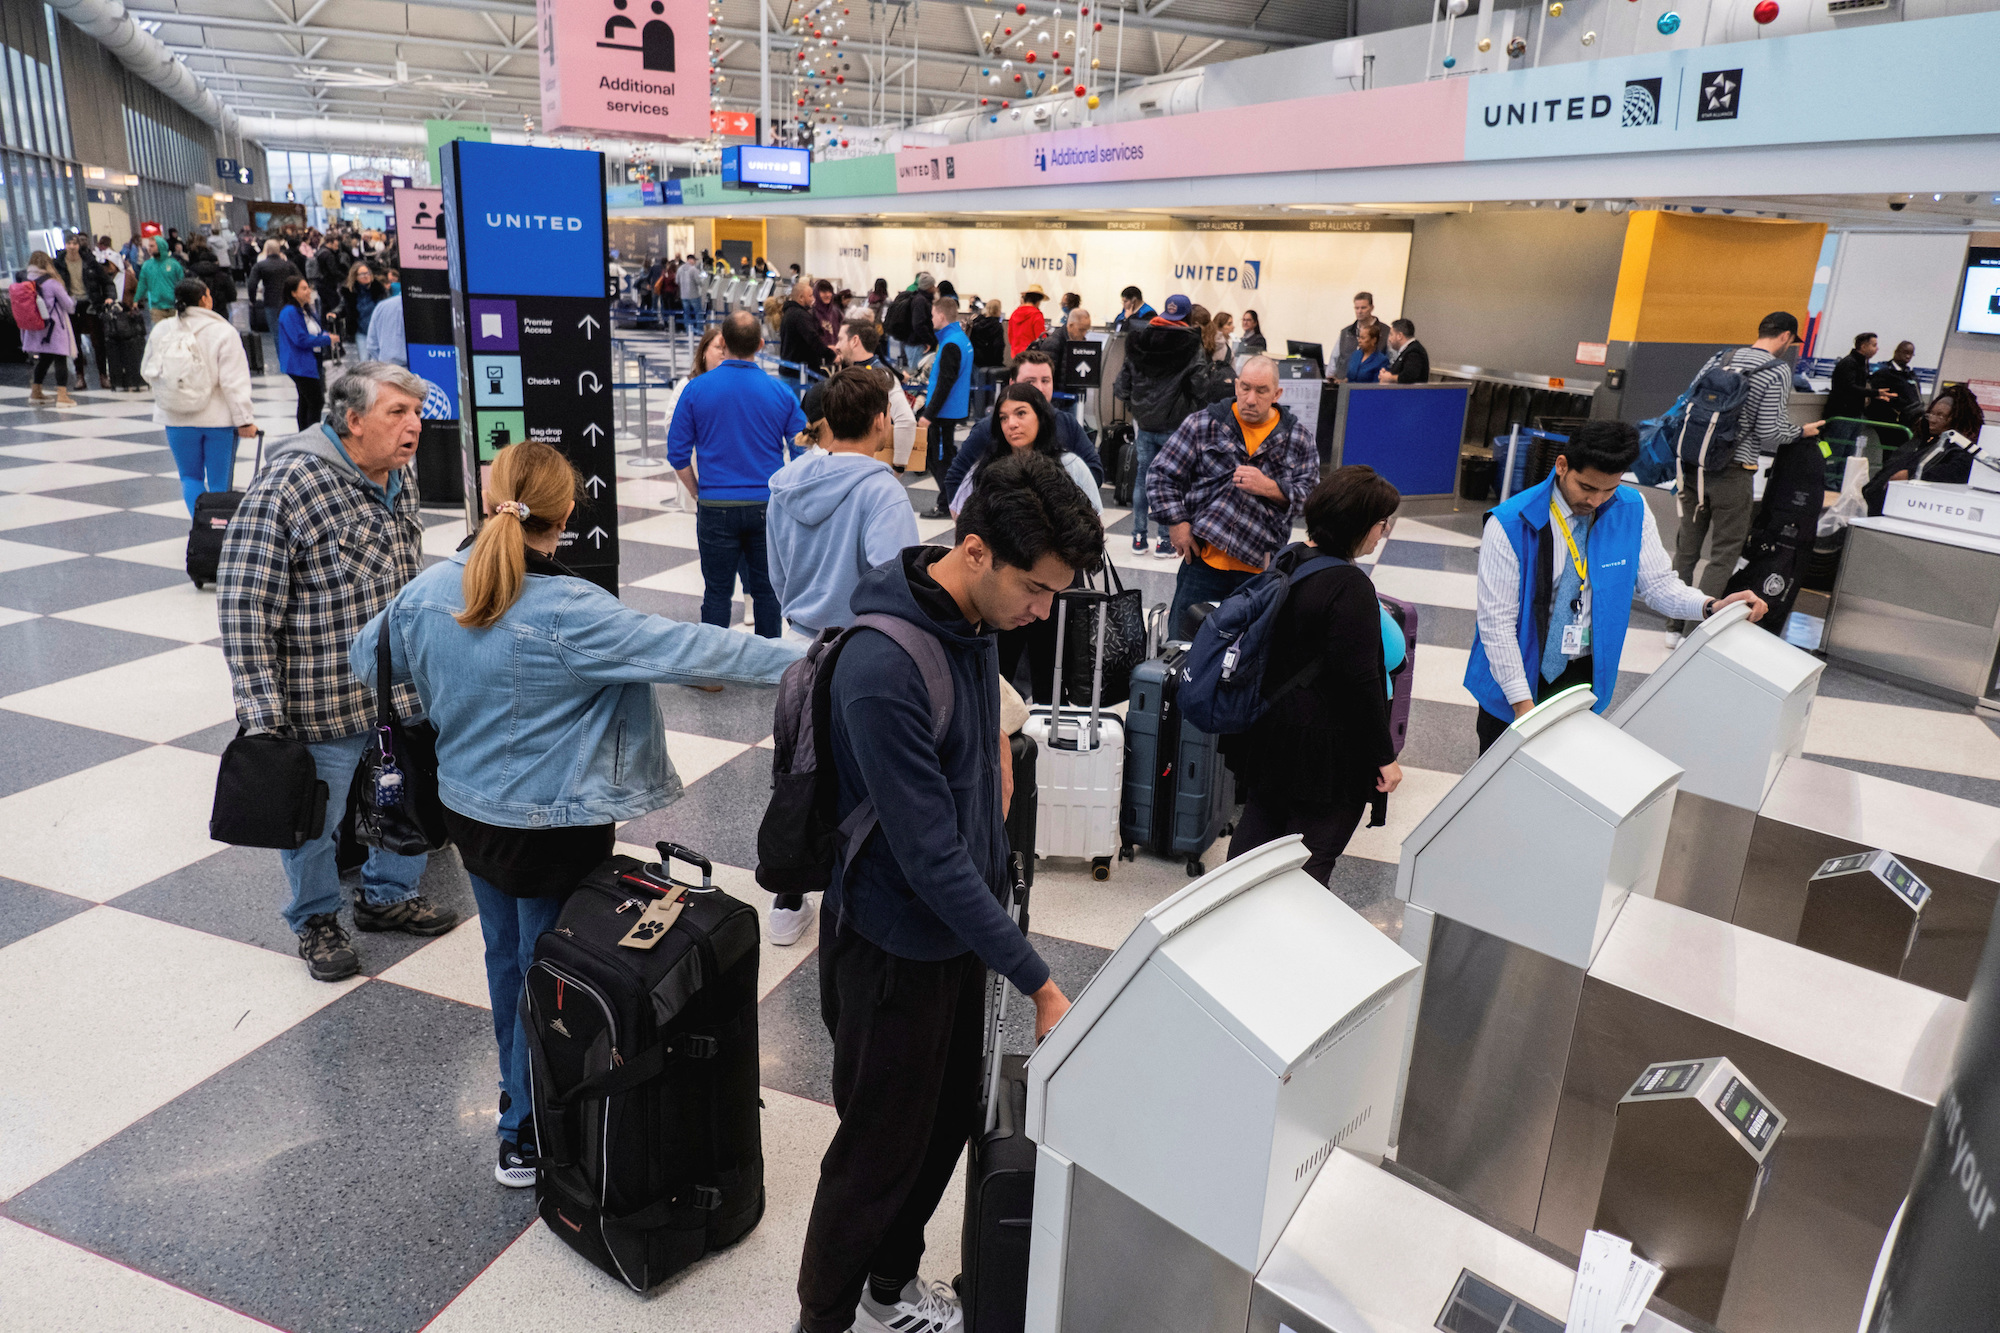 Travelers check in for flights ahead of the Thanksgiving at O’Hare International Airport in Chicago on Wednesday.